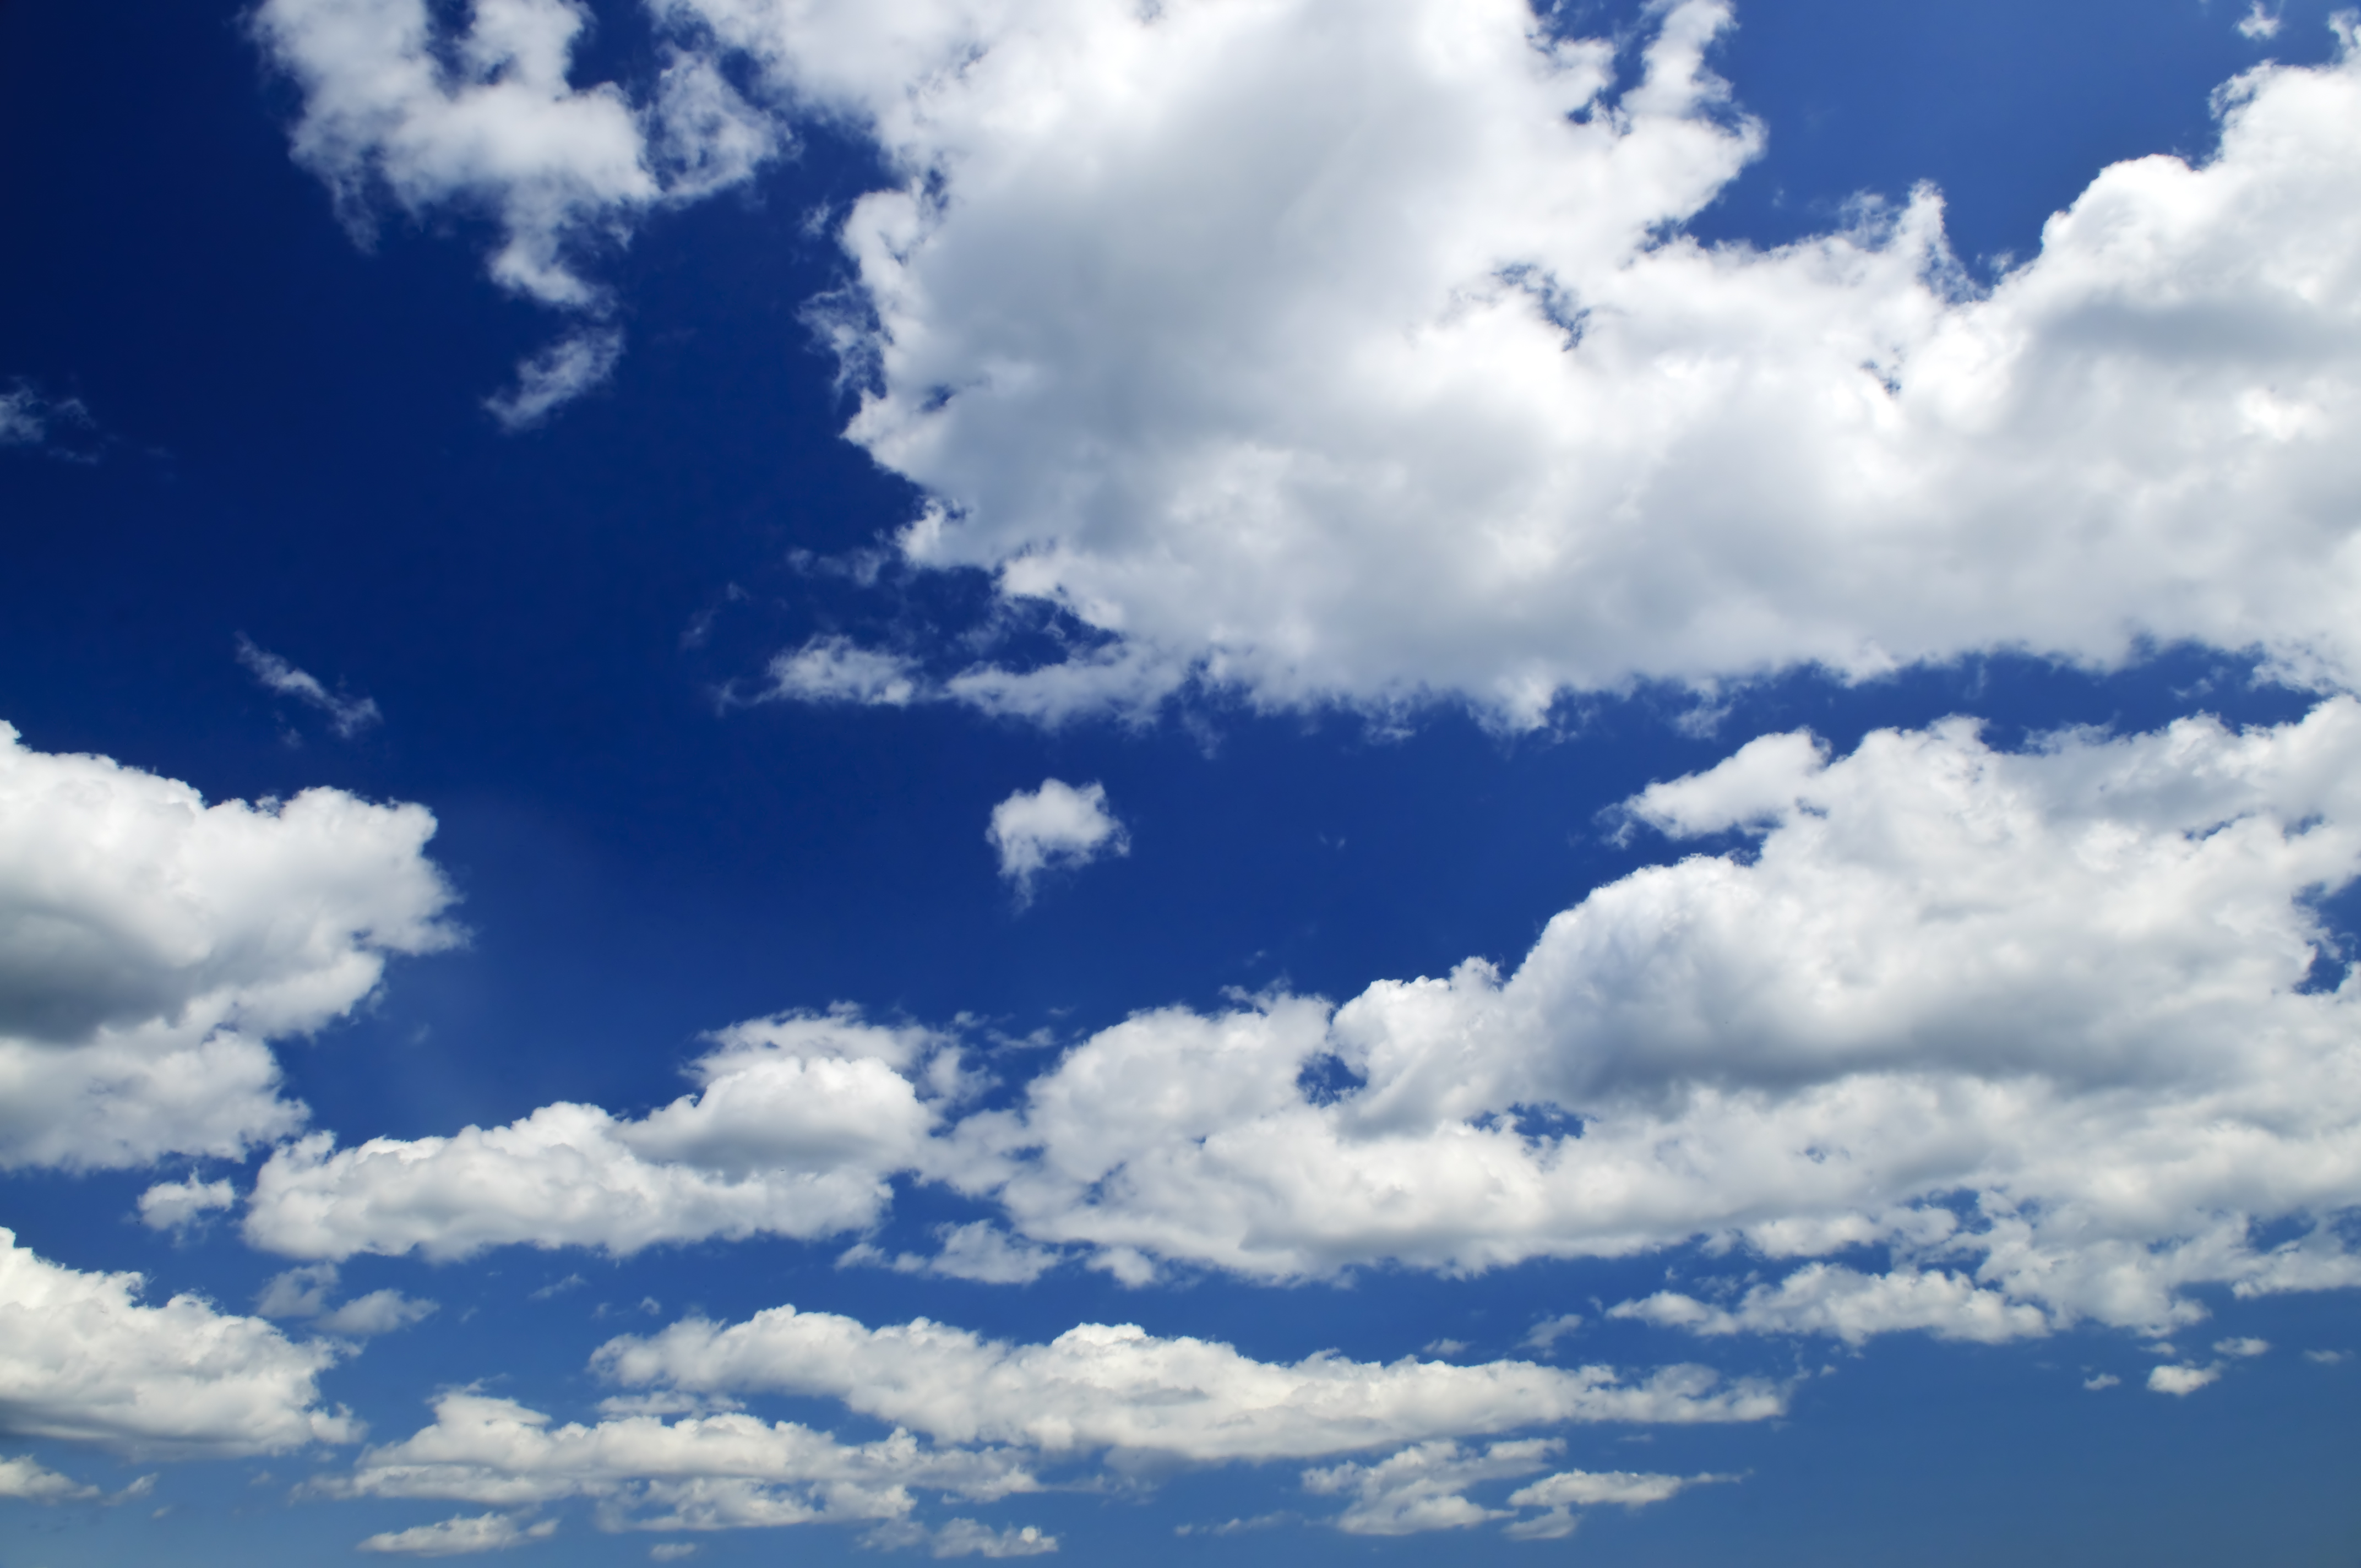 [46+] Sky Pictures with Clouds Wallpaper - WallpaperSafari